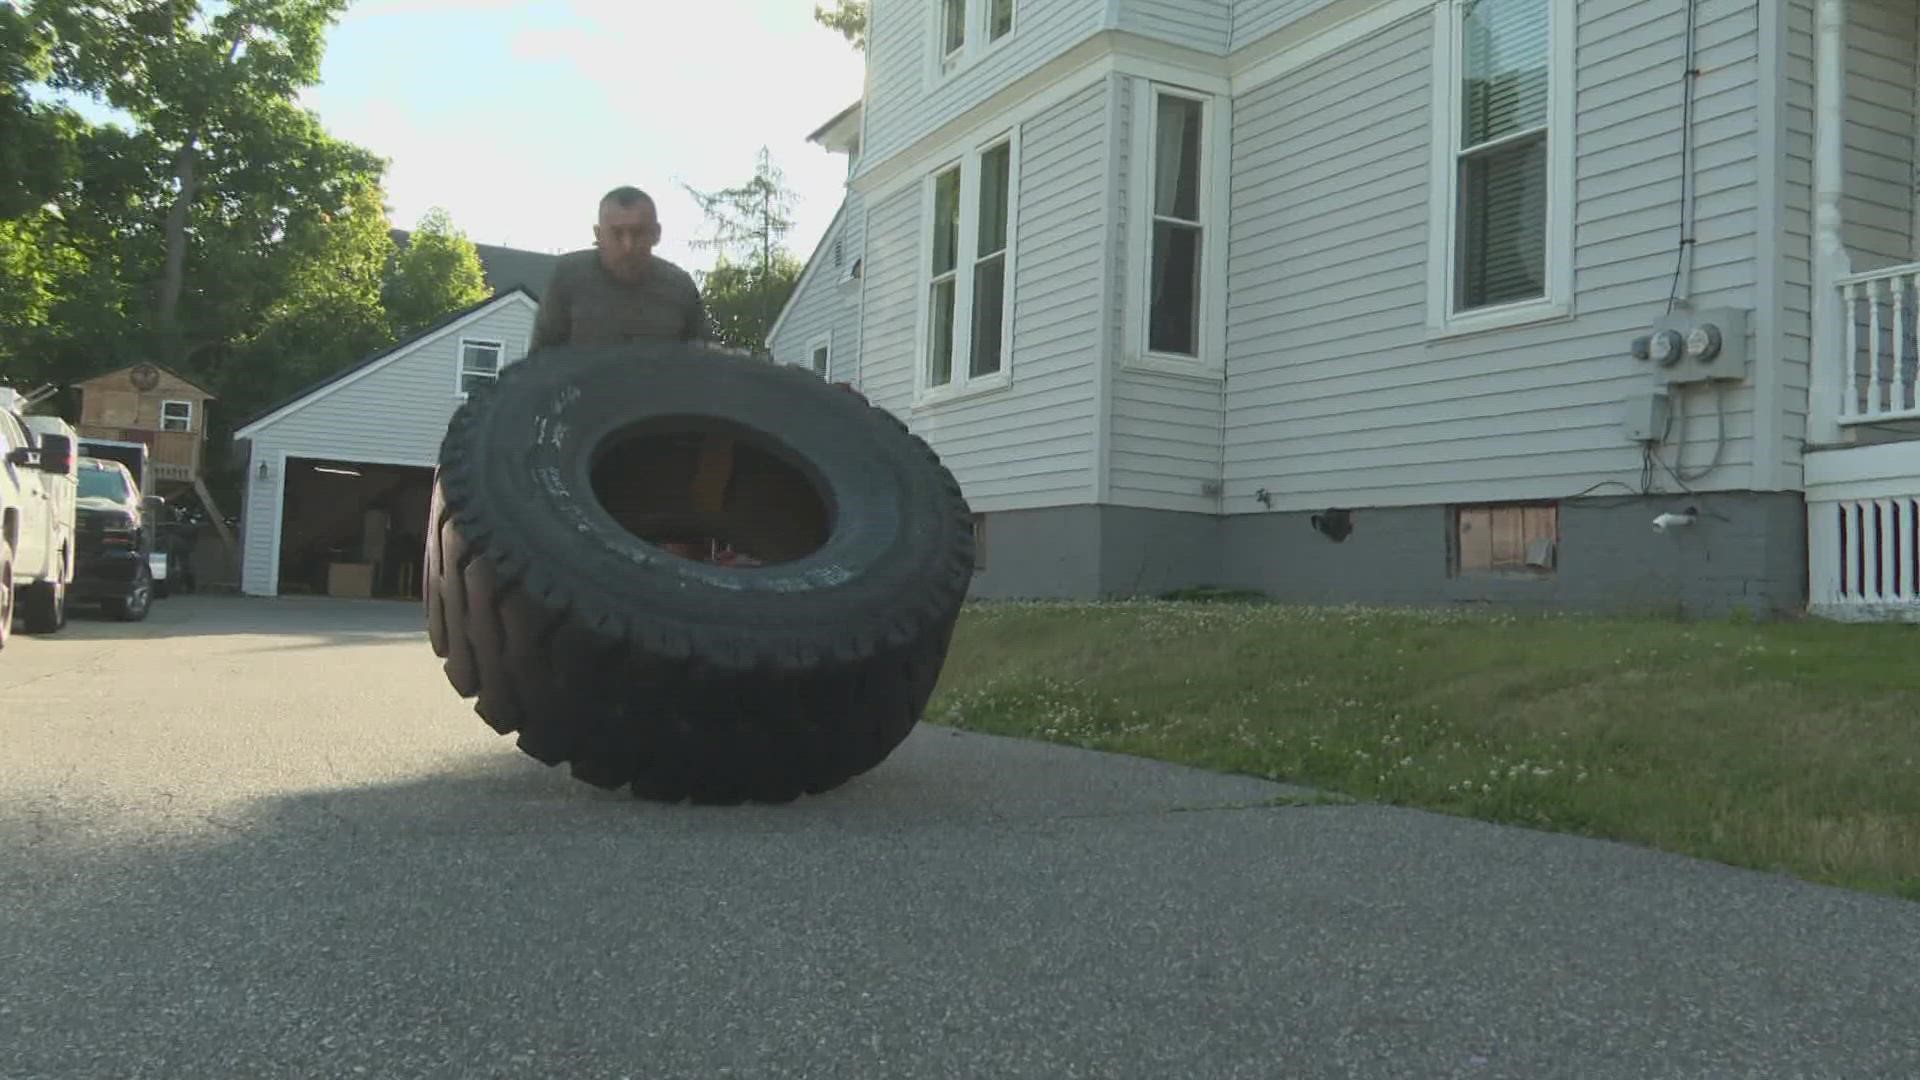 A Bangor man is attempting to break a personal time record and funds raised record by flipping a giant tire for one mile.